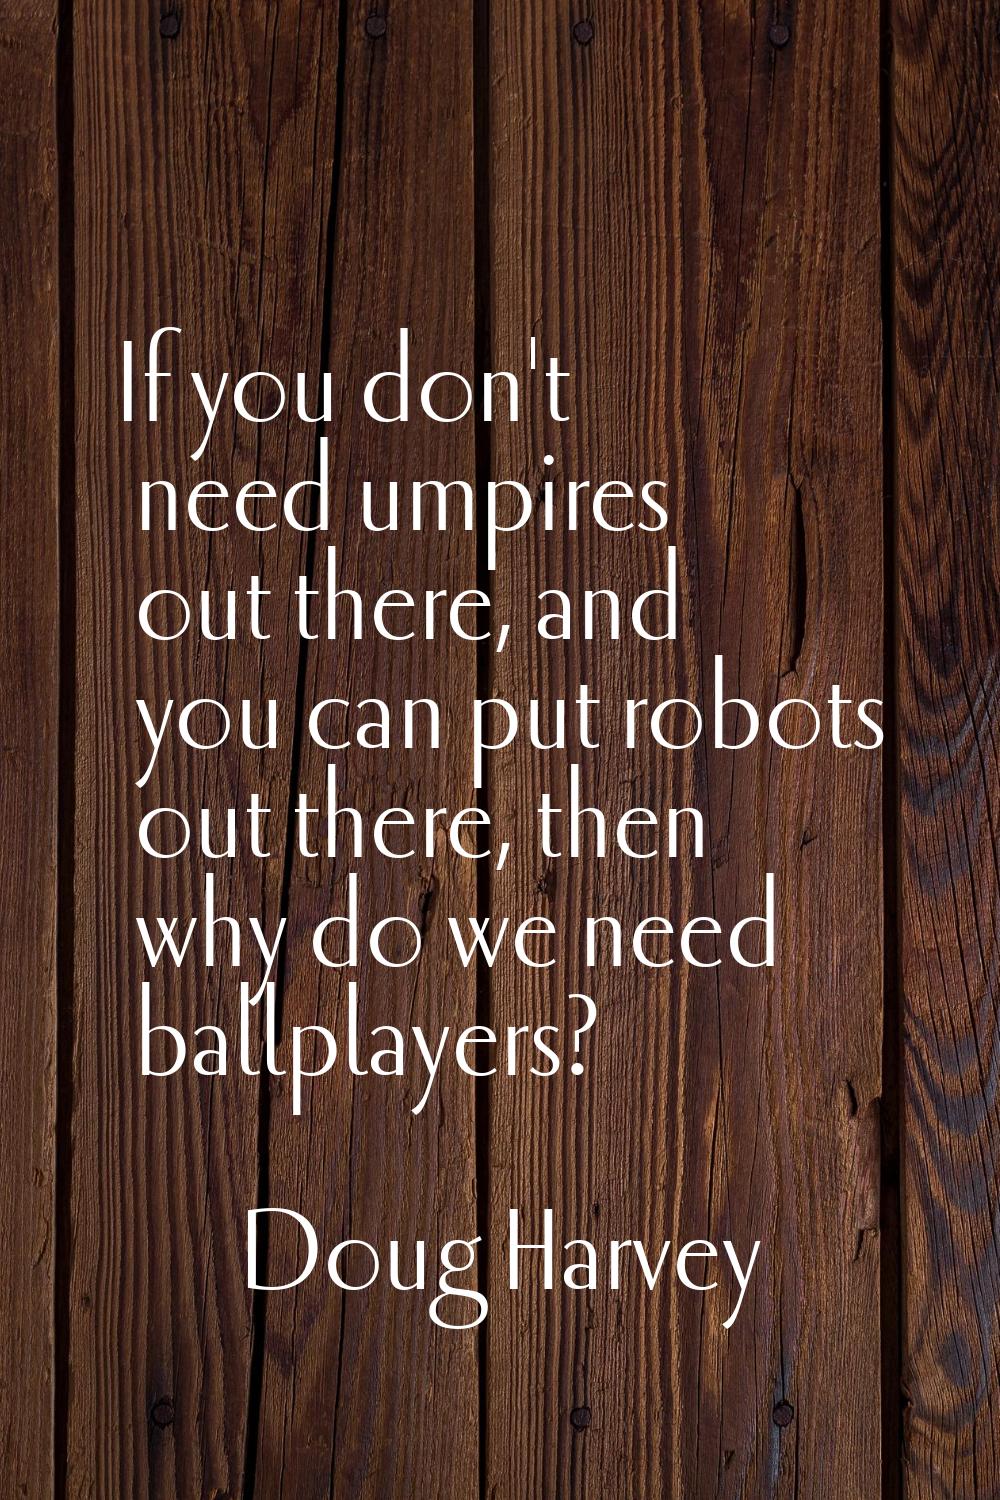 If you don't need umpires out there, and you can put robots out there, then why do we need ballplay